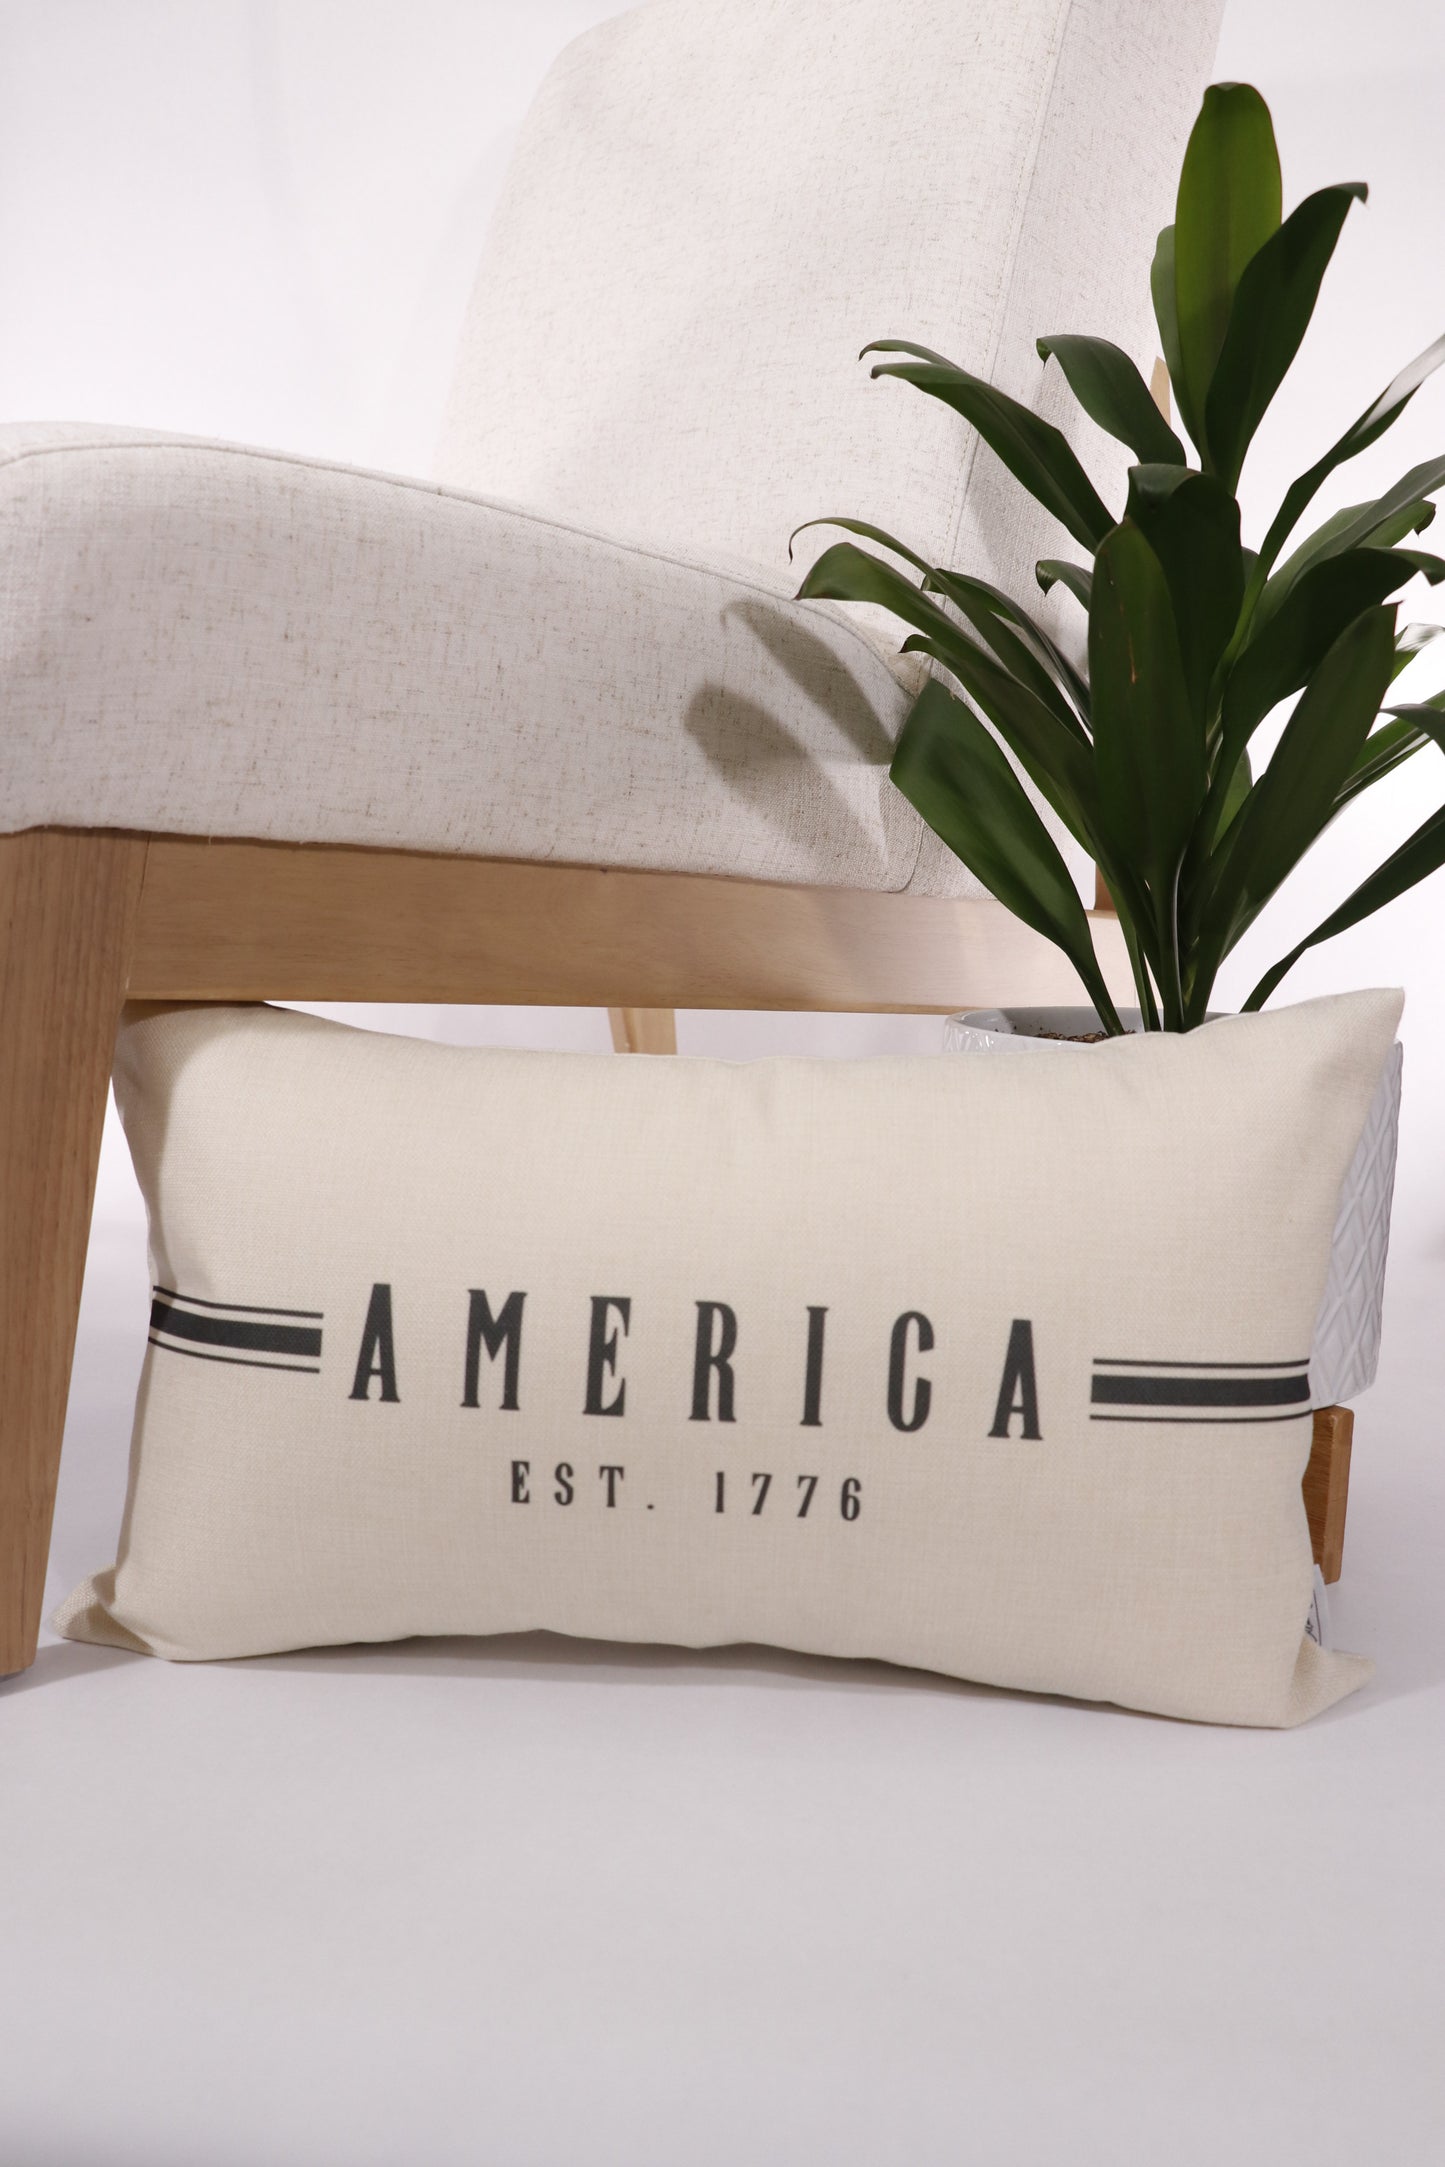 America with Stripes 12x20 Pillow Cover